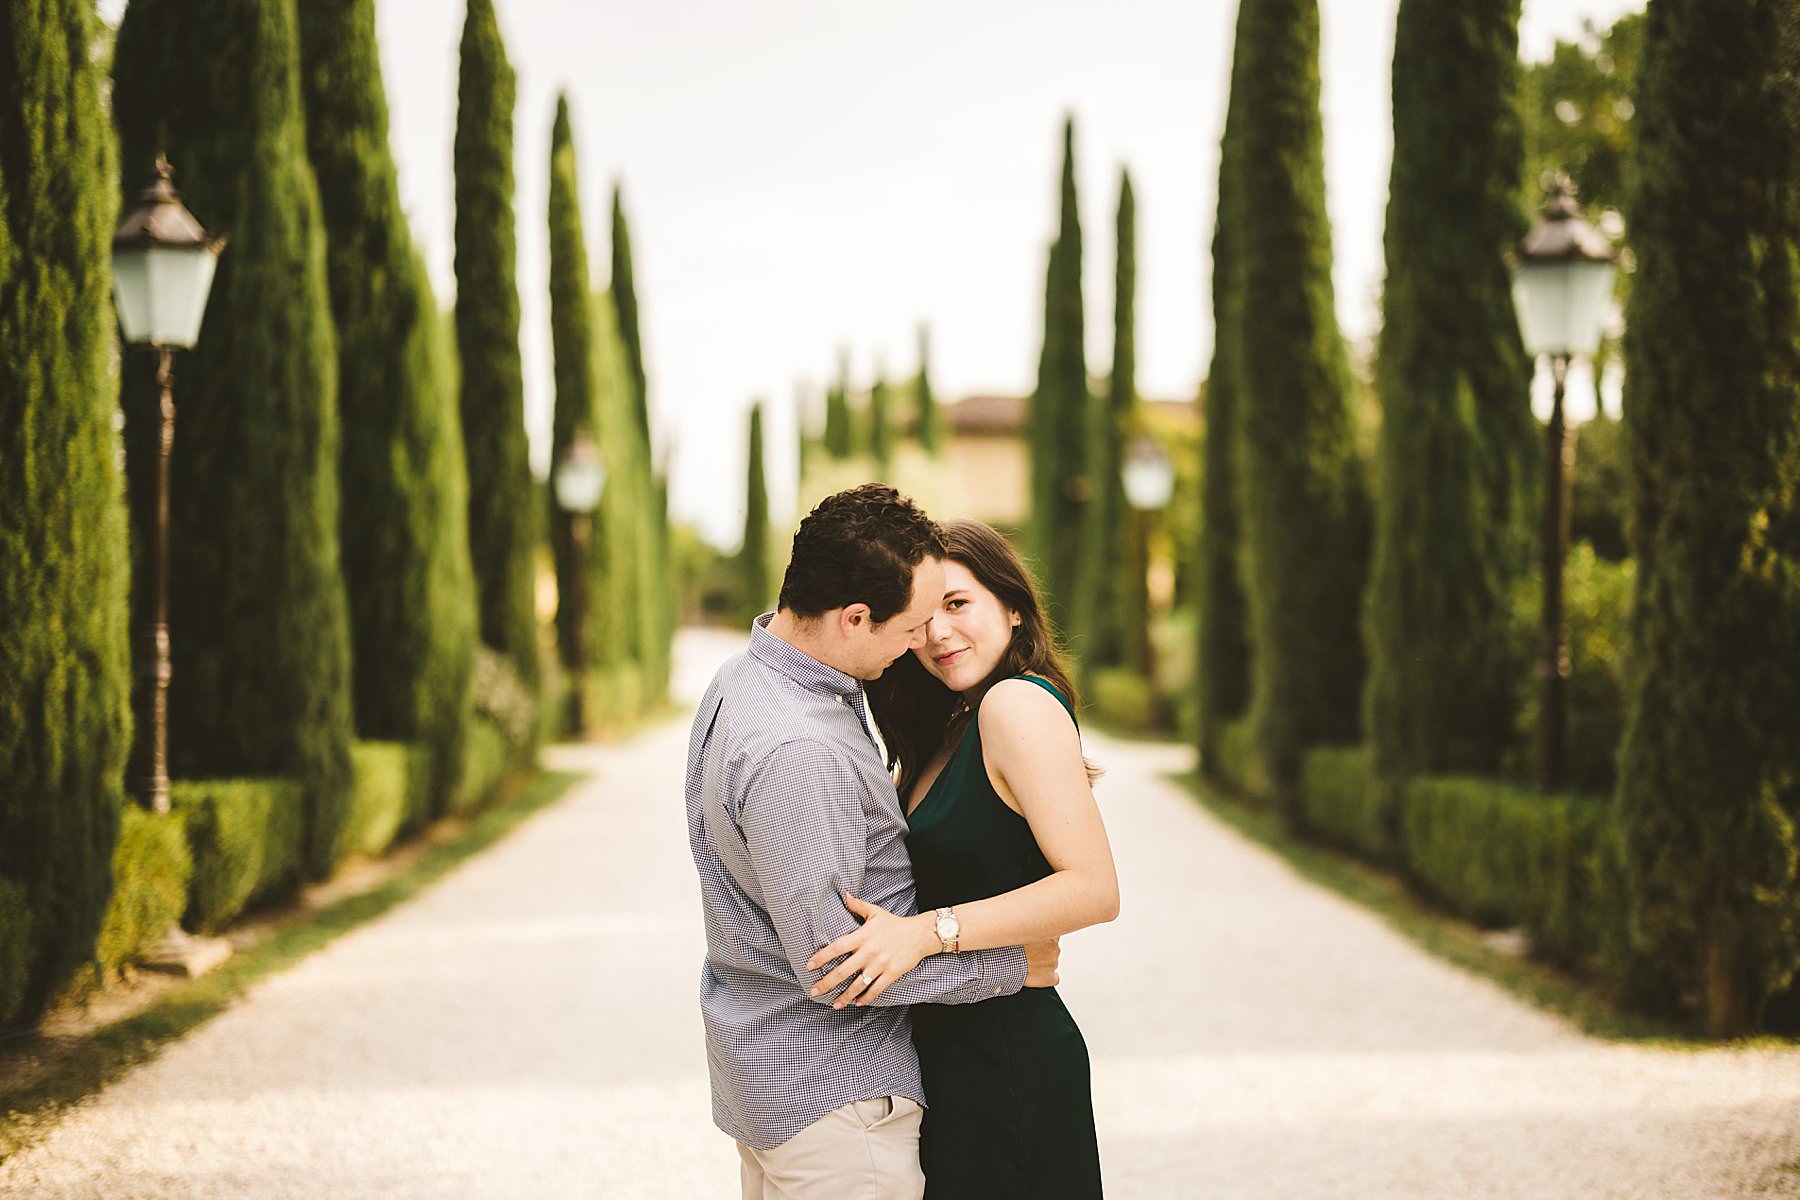 Romantic pre-wedding engagement session in Tuscany countryside in the splendid rural luxury destination of Borgo Santo Pietro which feature an evocative cypresses avenue, the very gem of the location